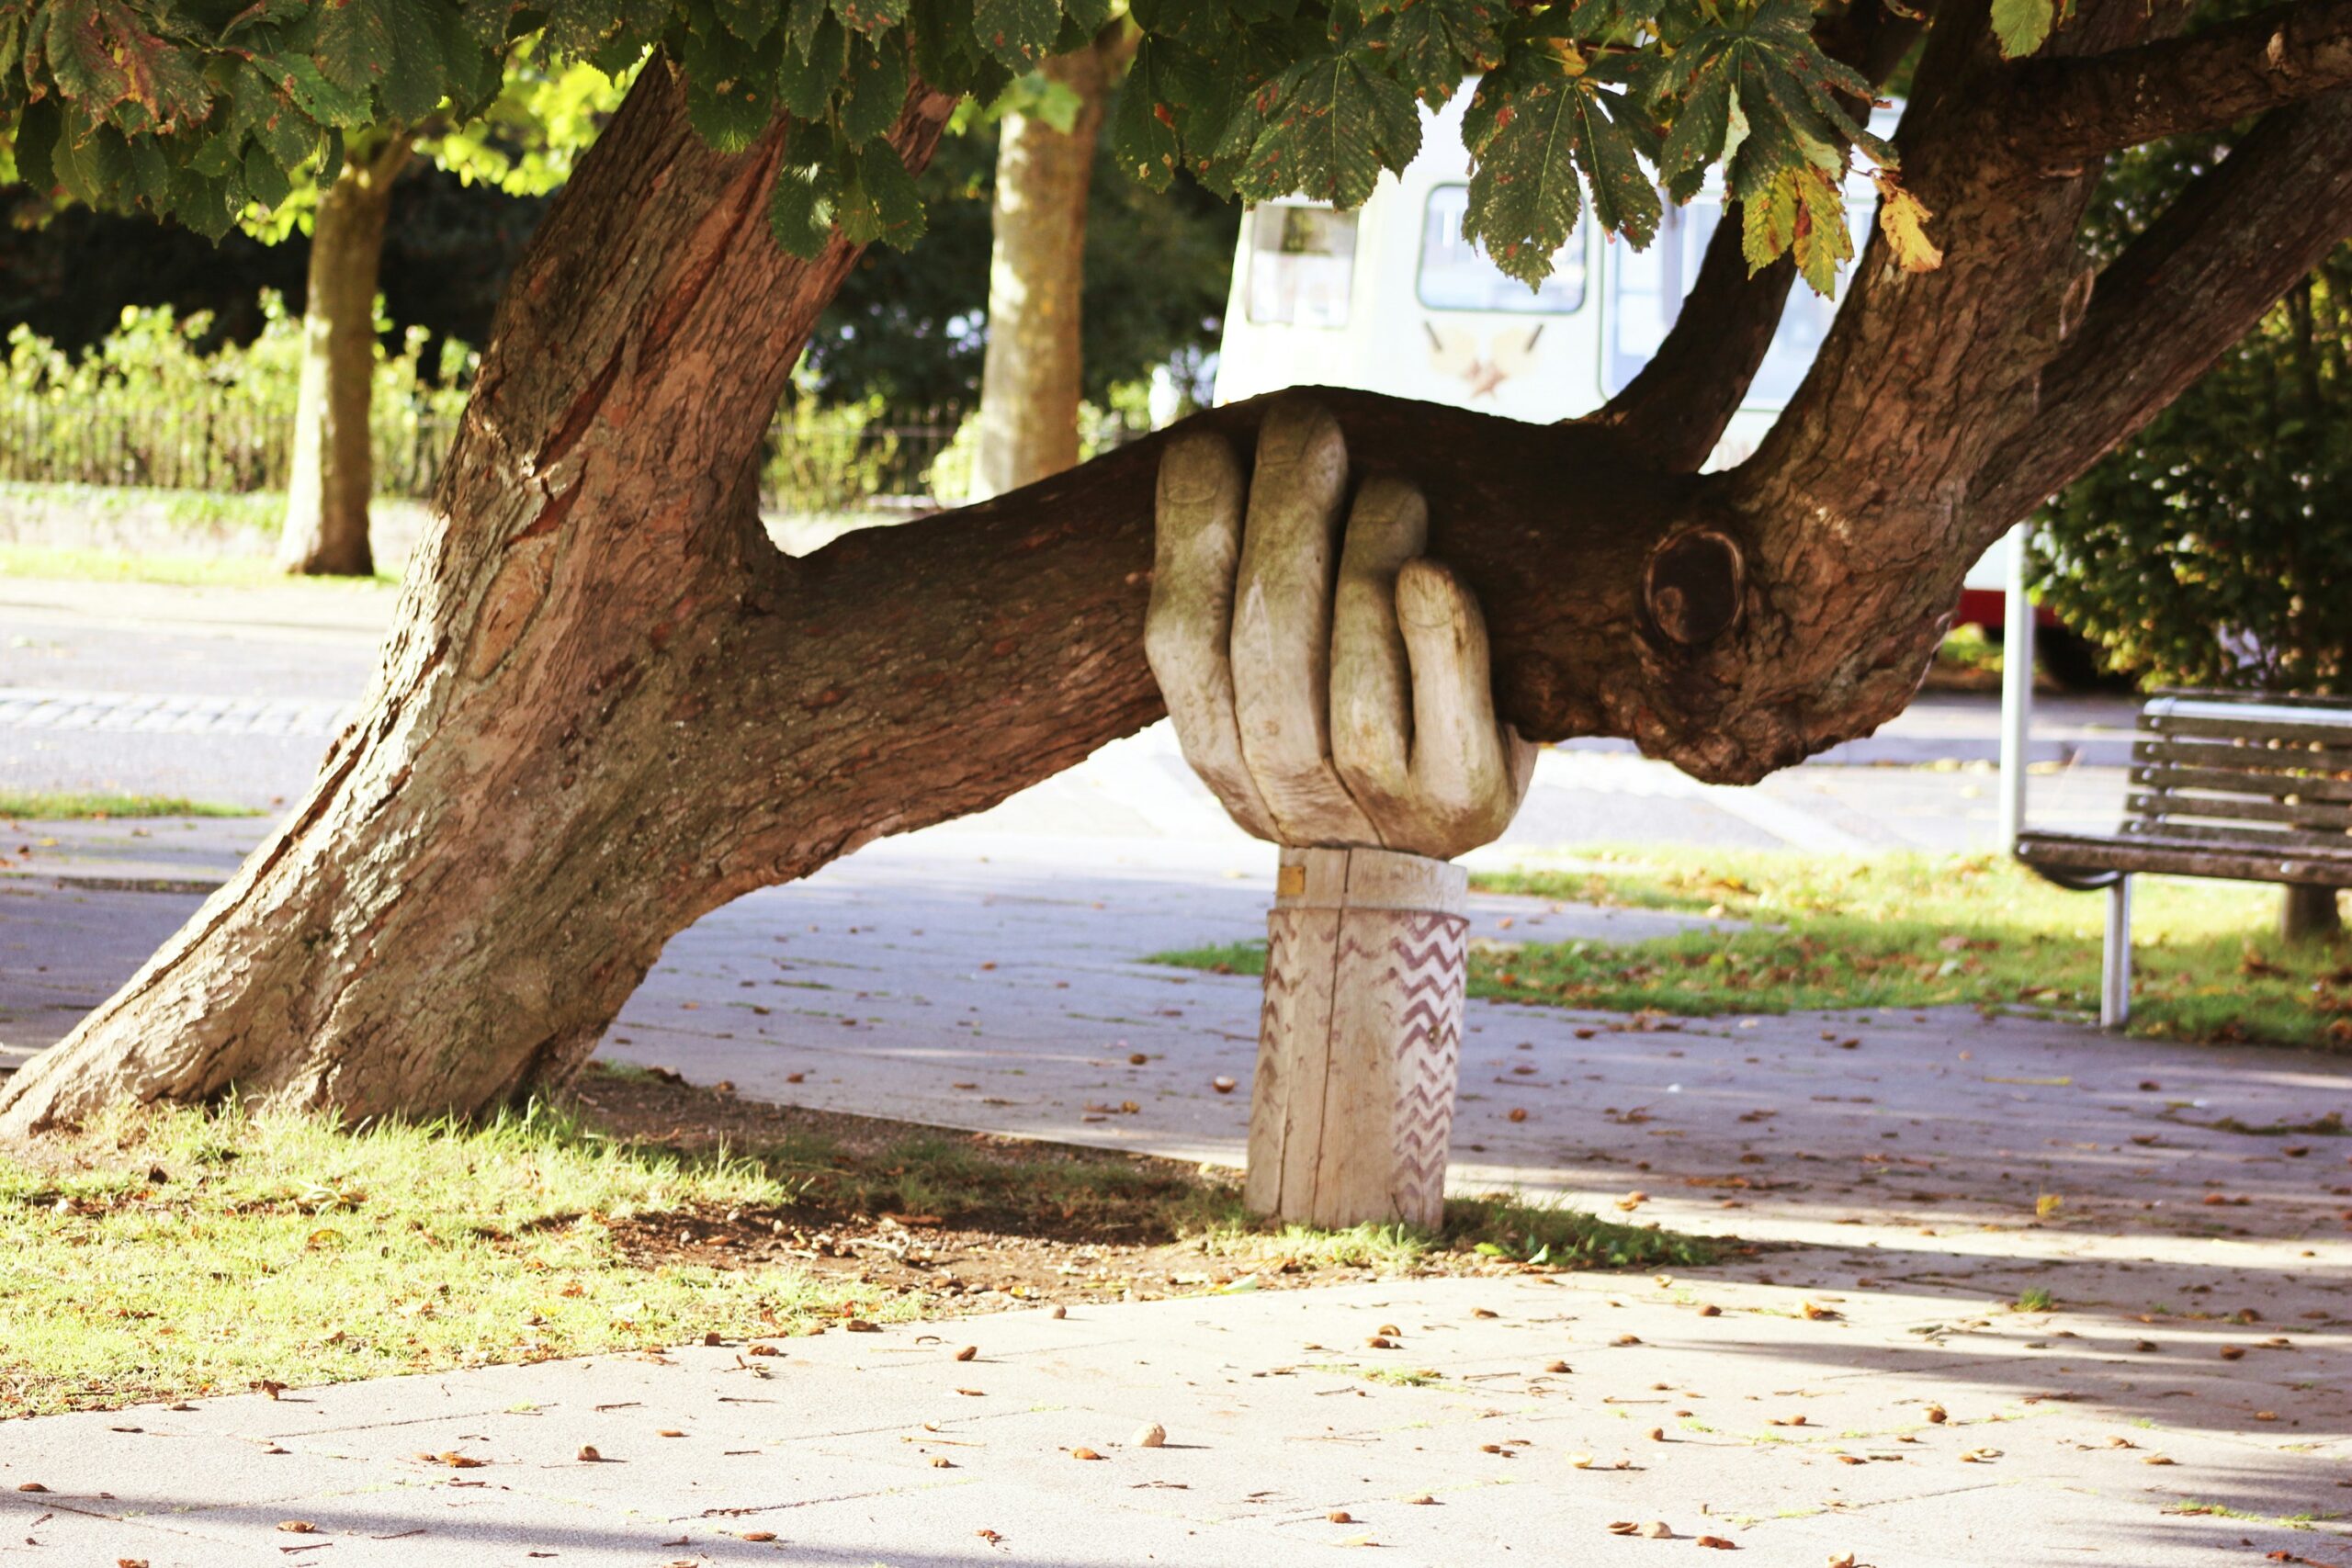 A sculpture of a hand is holding up the branch of a large tree